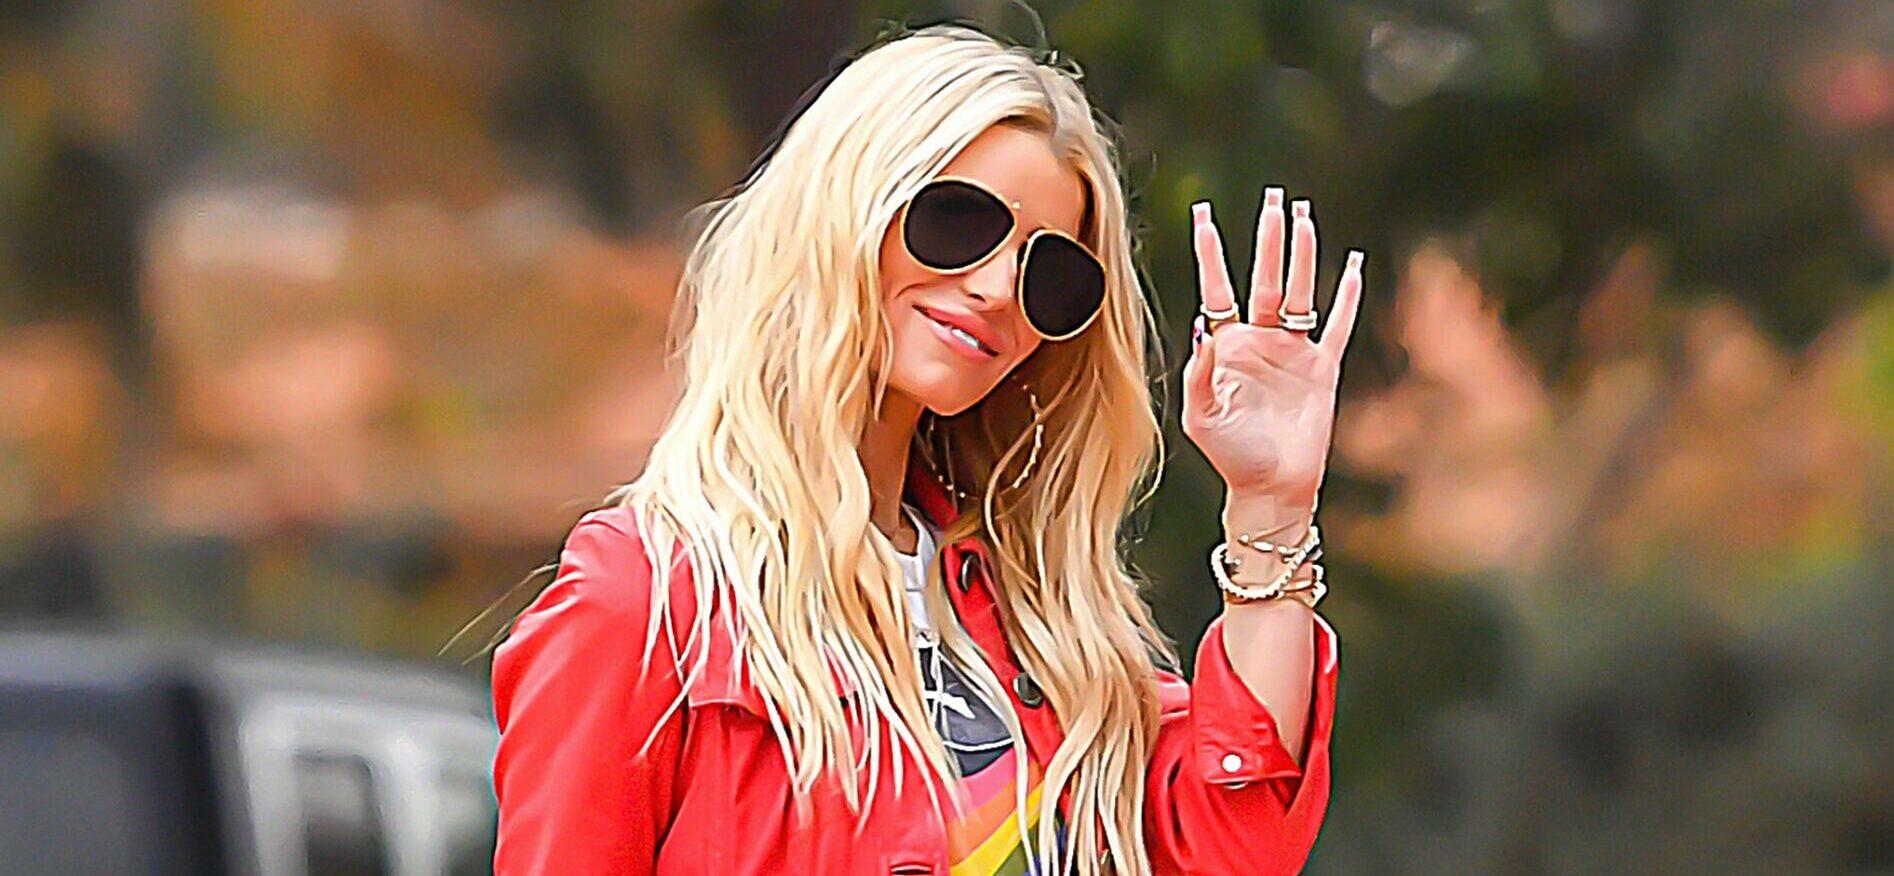 Jessica Simpson trolled again for her weight